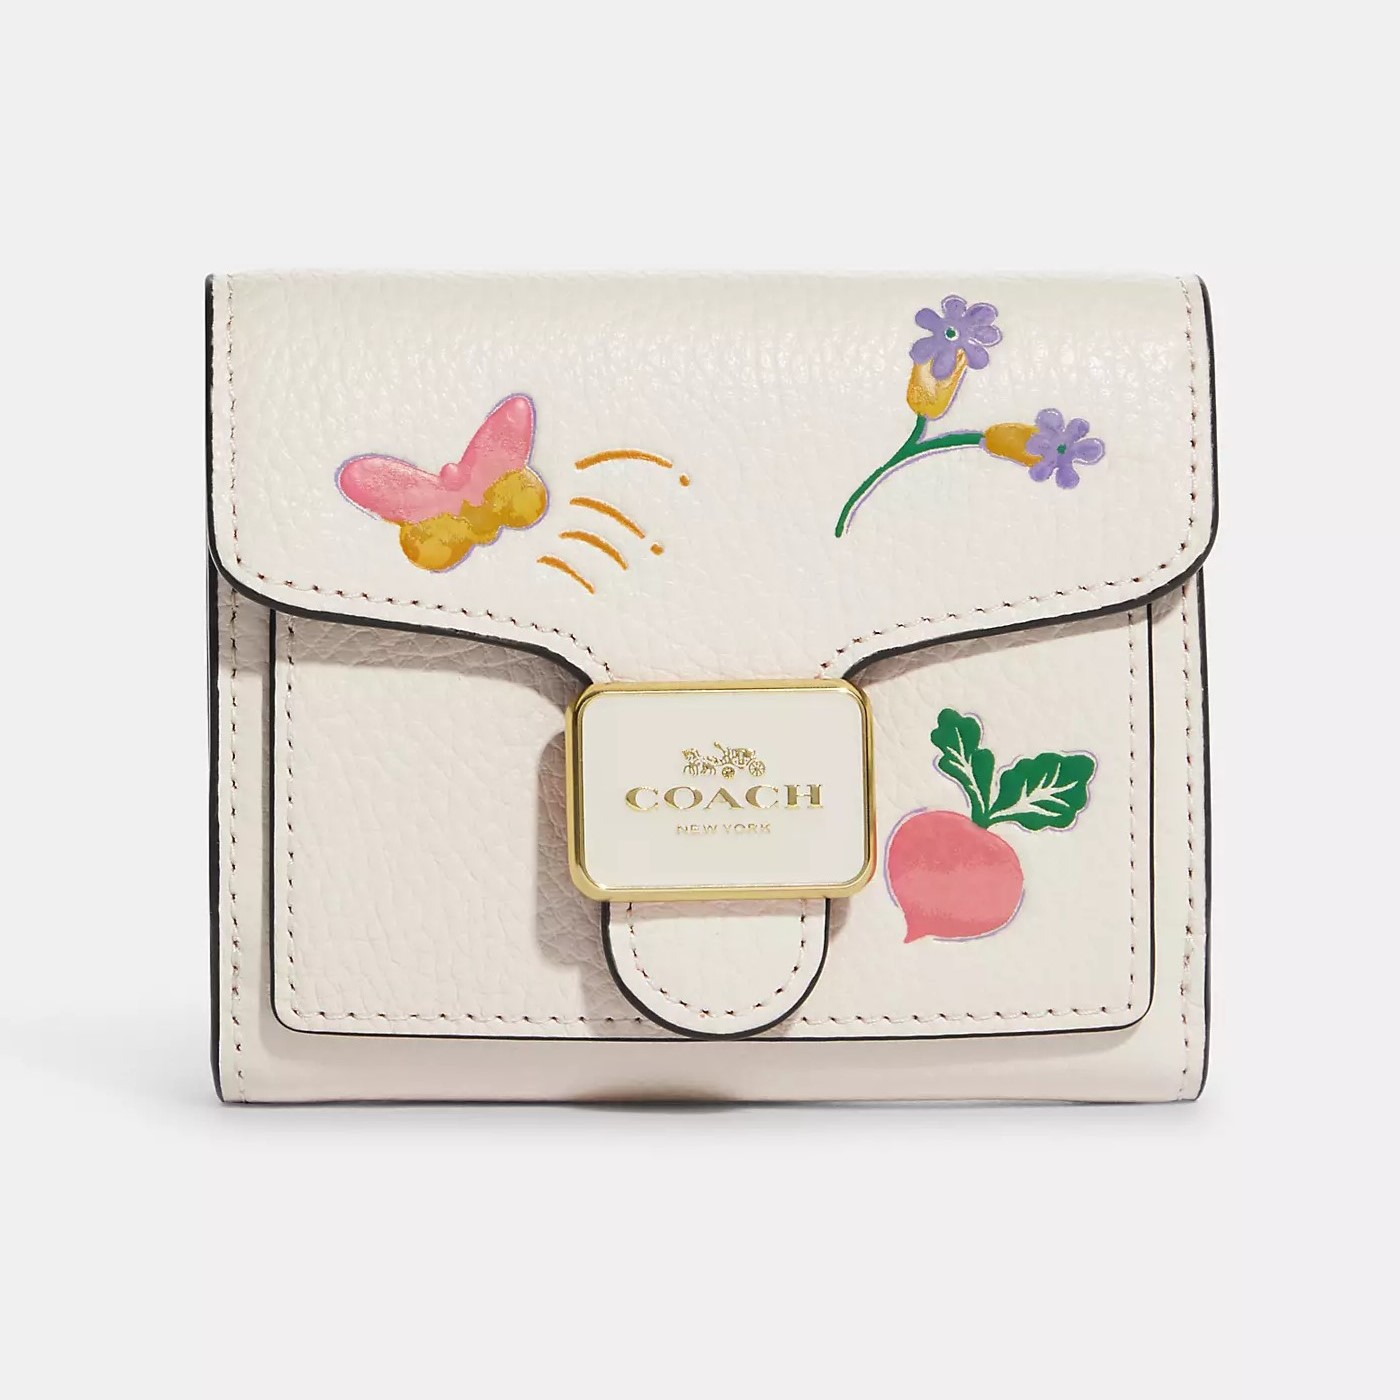 VÍ COACH NỮ PEPPER WALLET WITH DREAMY VEGGIE PRINT REFINED PEBBLE LEATHER C8727 3